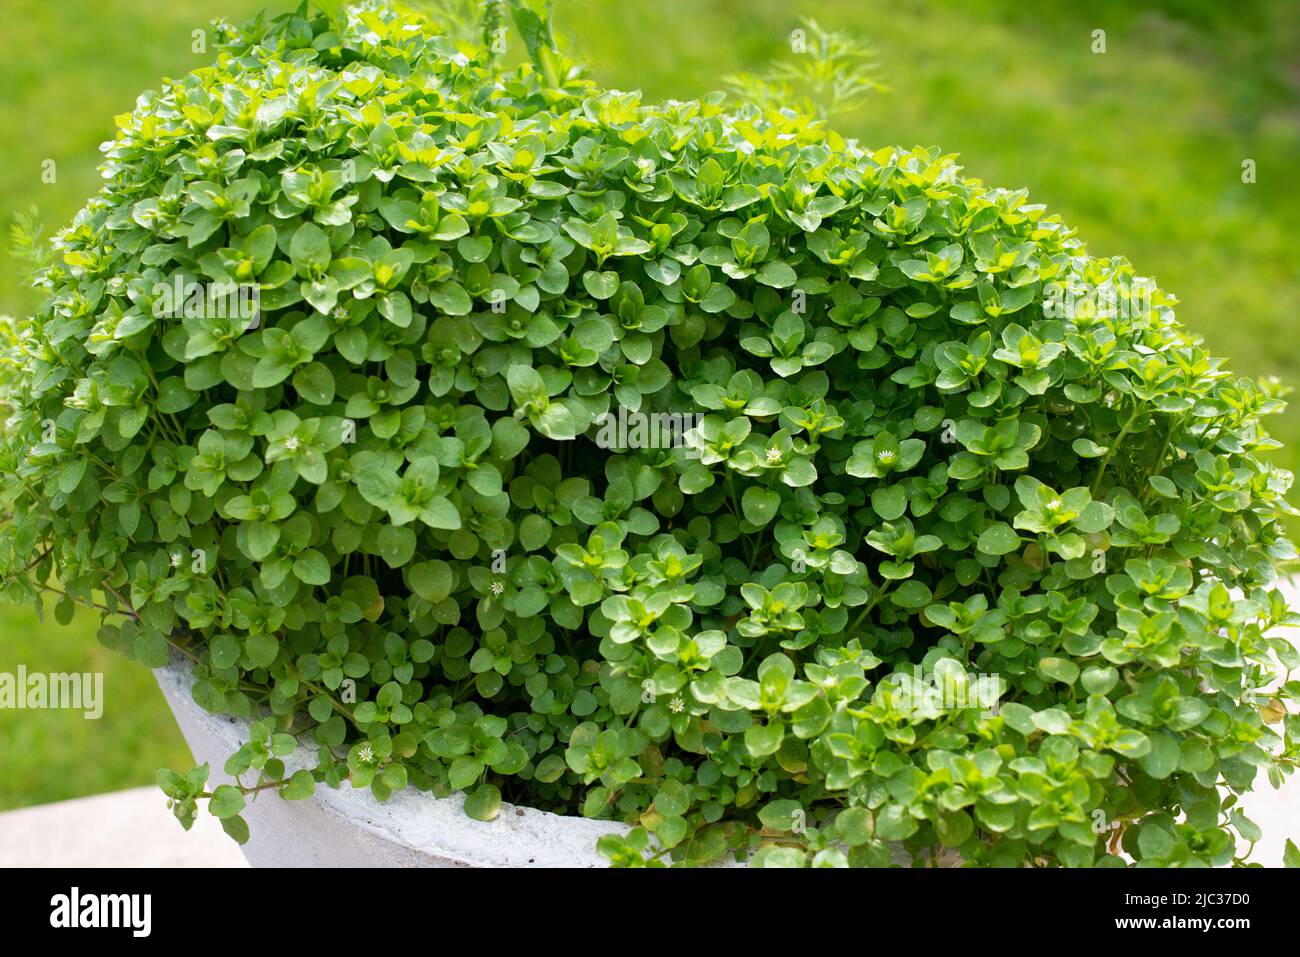 Common chickweed, Stellaria media, with small white flowers. Stock Photo